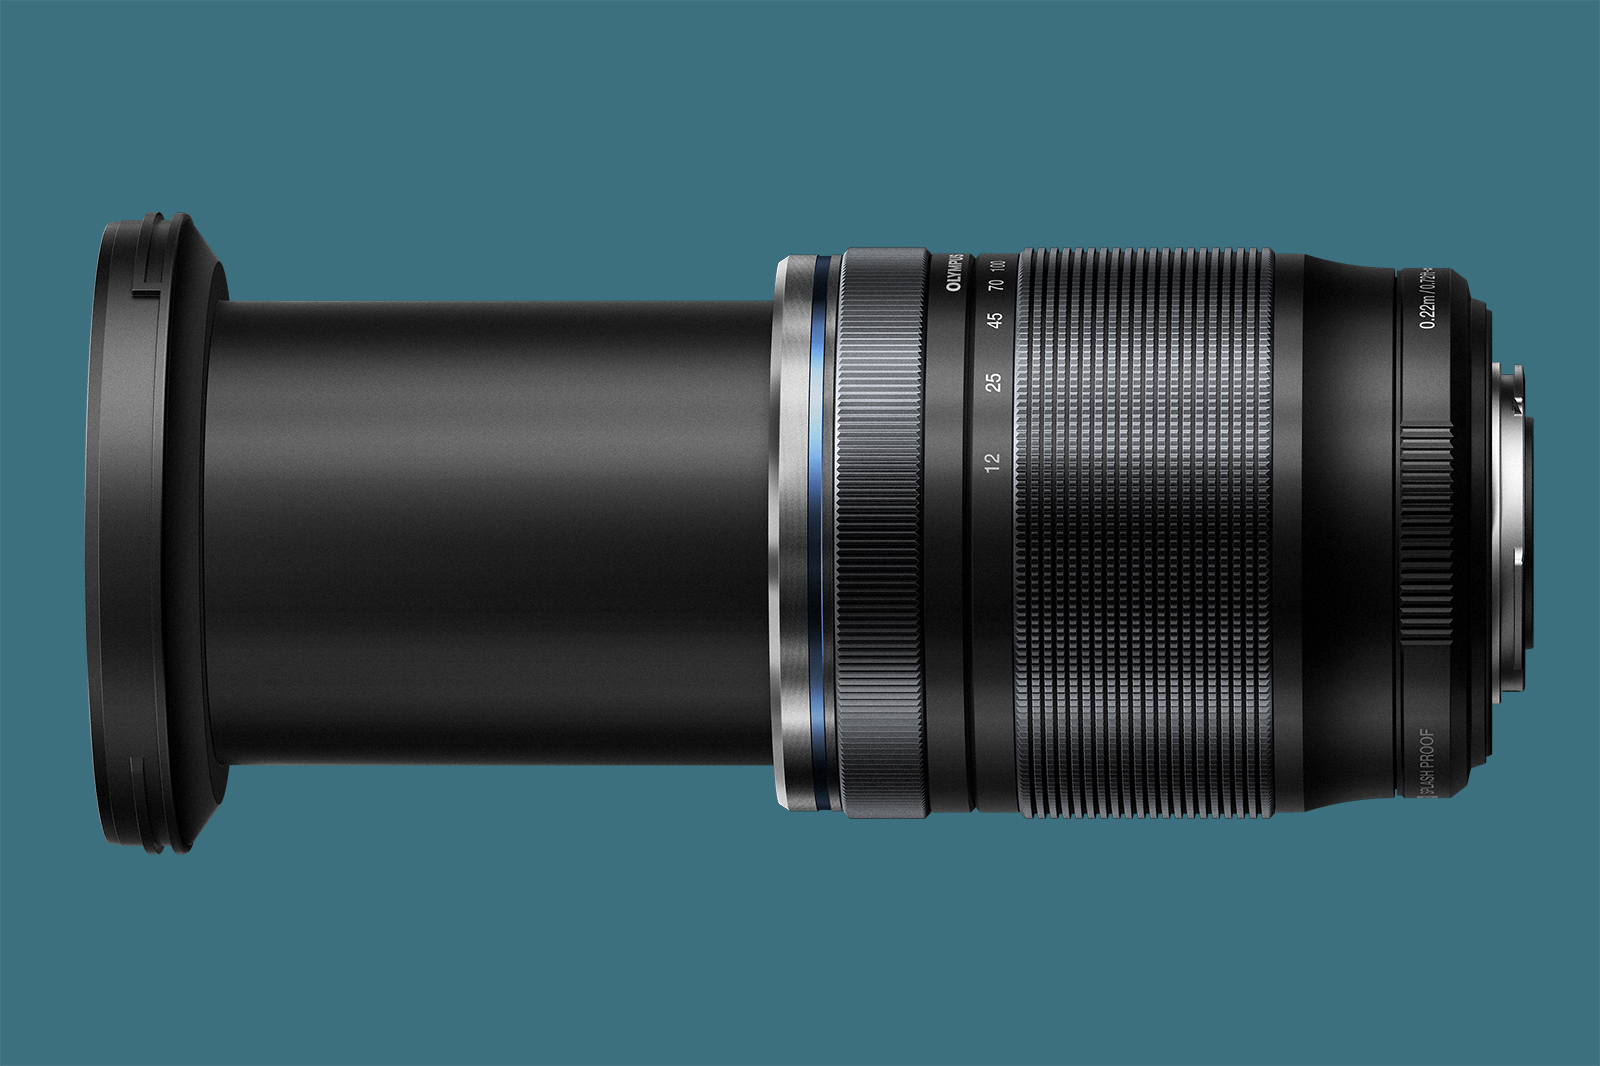 The Olympus 12-200mm Pro Lens has the Widest Zoom Range Yet